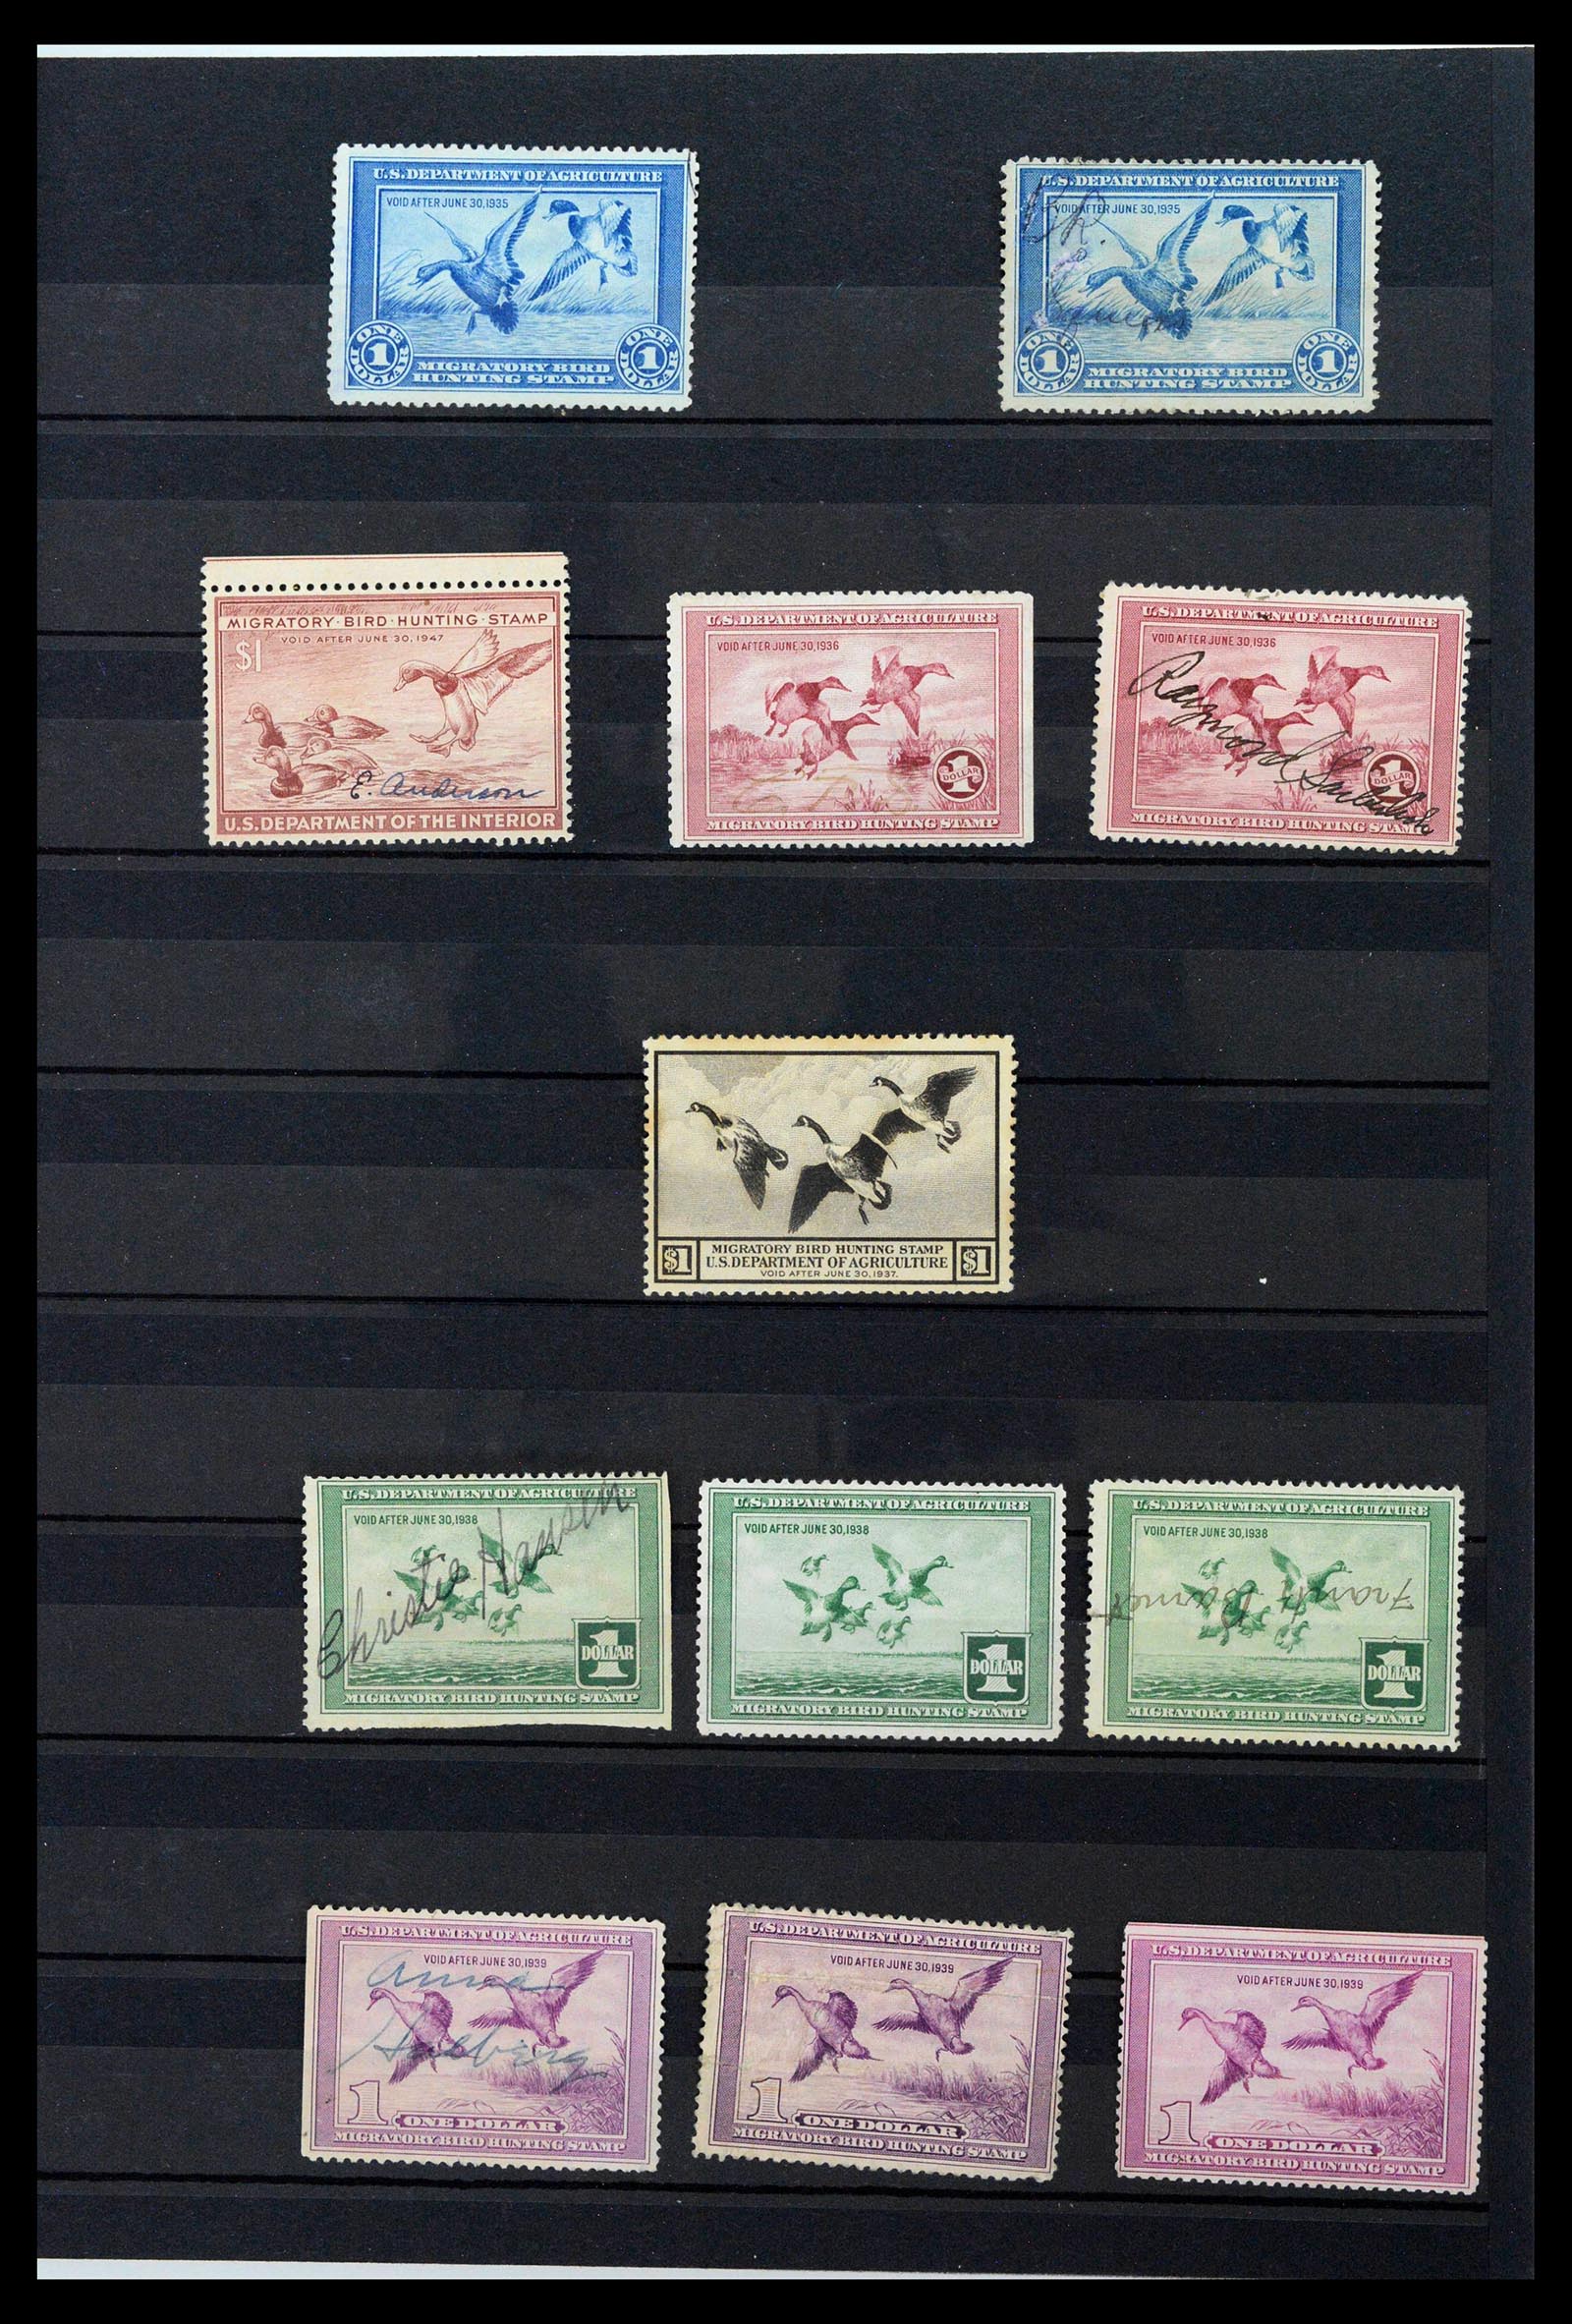 39426 0001 - Stamp collection 39426 USA duckstamps 1934-2007.